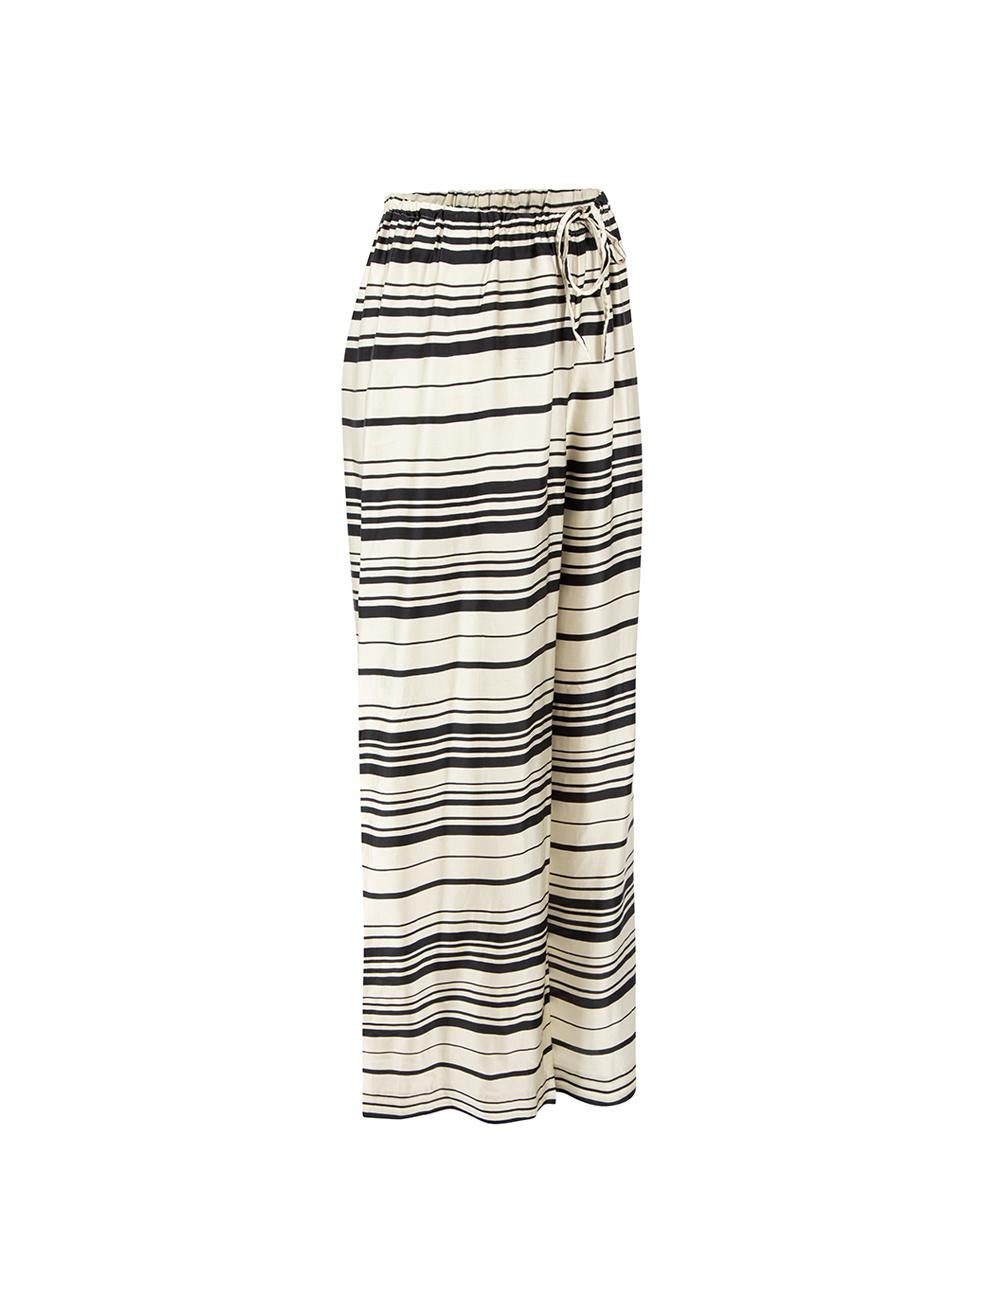 CONDITION is Very good. Minimal wear to trousers is evident. Minimal wear to fabric with negligible marks at back leg on this used Dries Van Noten designer resale item.



Details


Beige

Viscose

Trousers

Black striped pattern

Elasticated